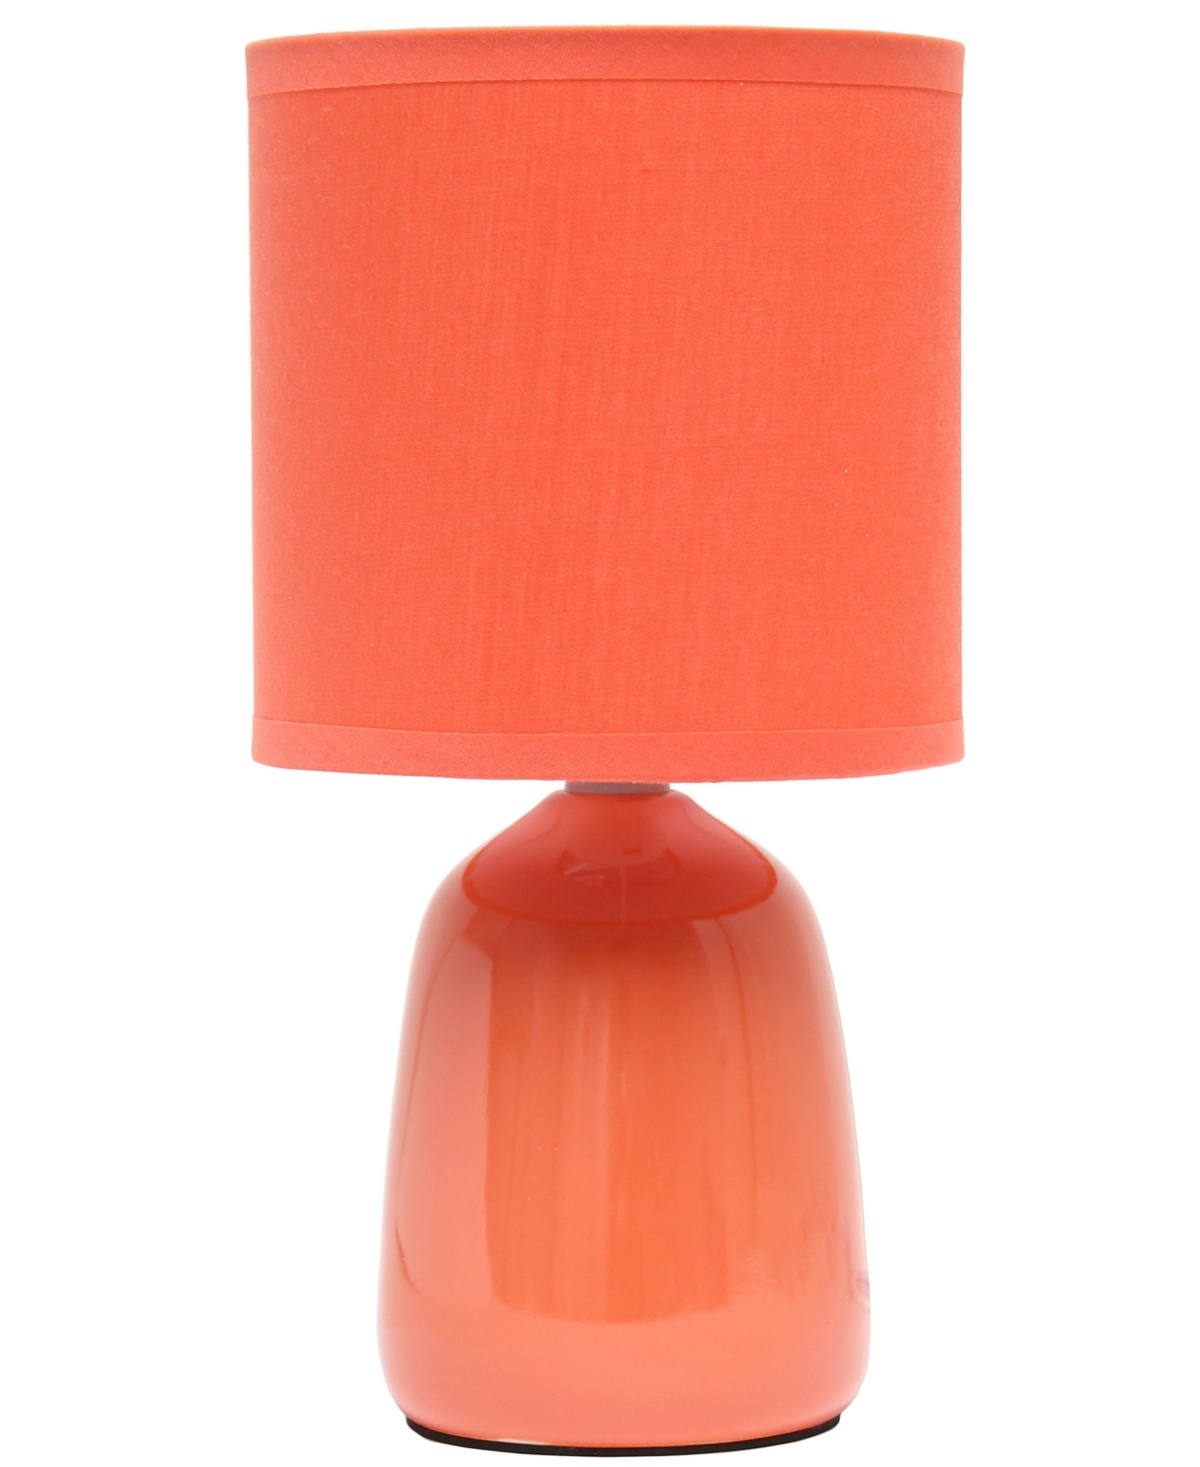 Shop Simple Designs 10.04" Tall Traditional Ceramic Thimble Base Bedside Table Desk Lamp With Matching Fabric Shade In Orange